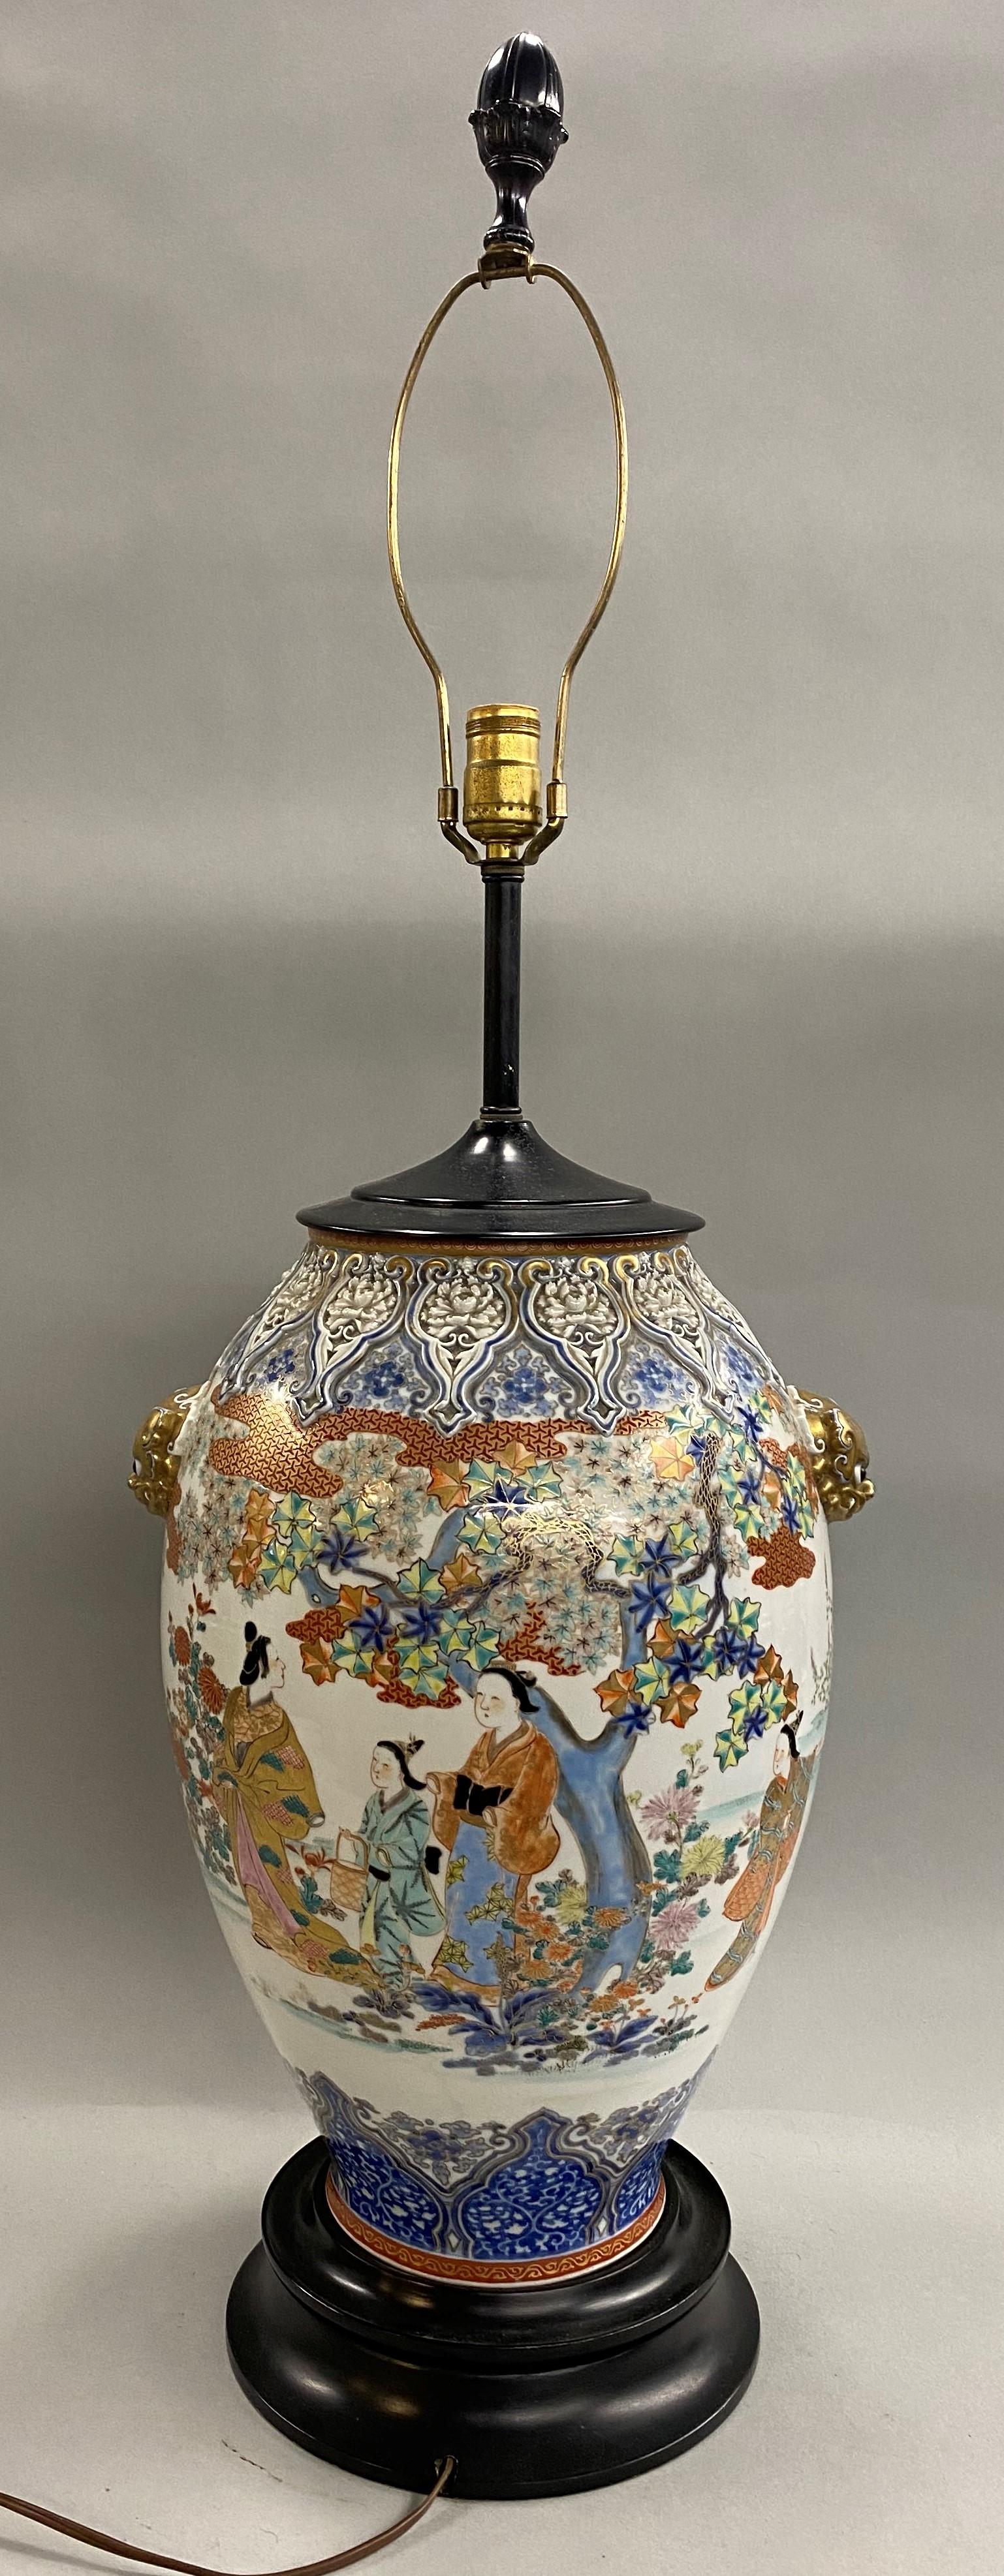 19th Century 19th C Chinese Polychrome Porcelain Vase Converted to Lamp with Foo Dog Handles